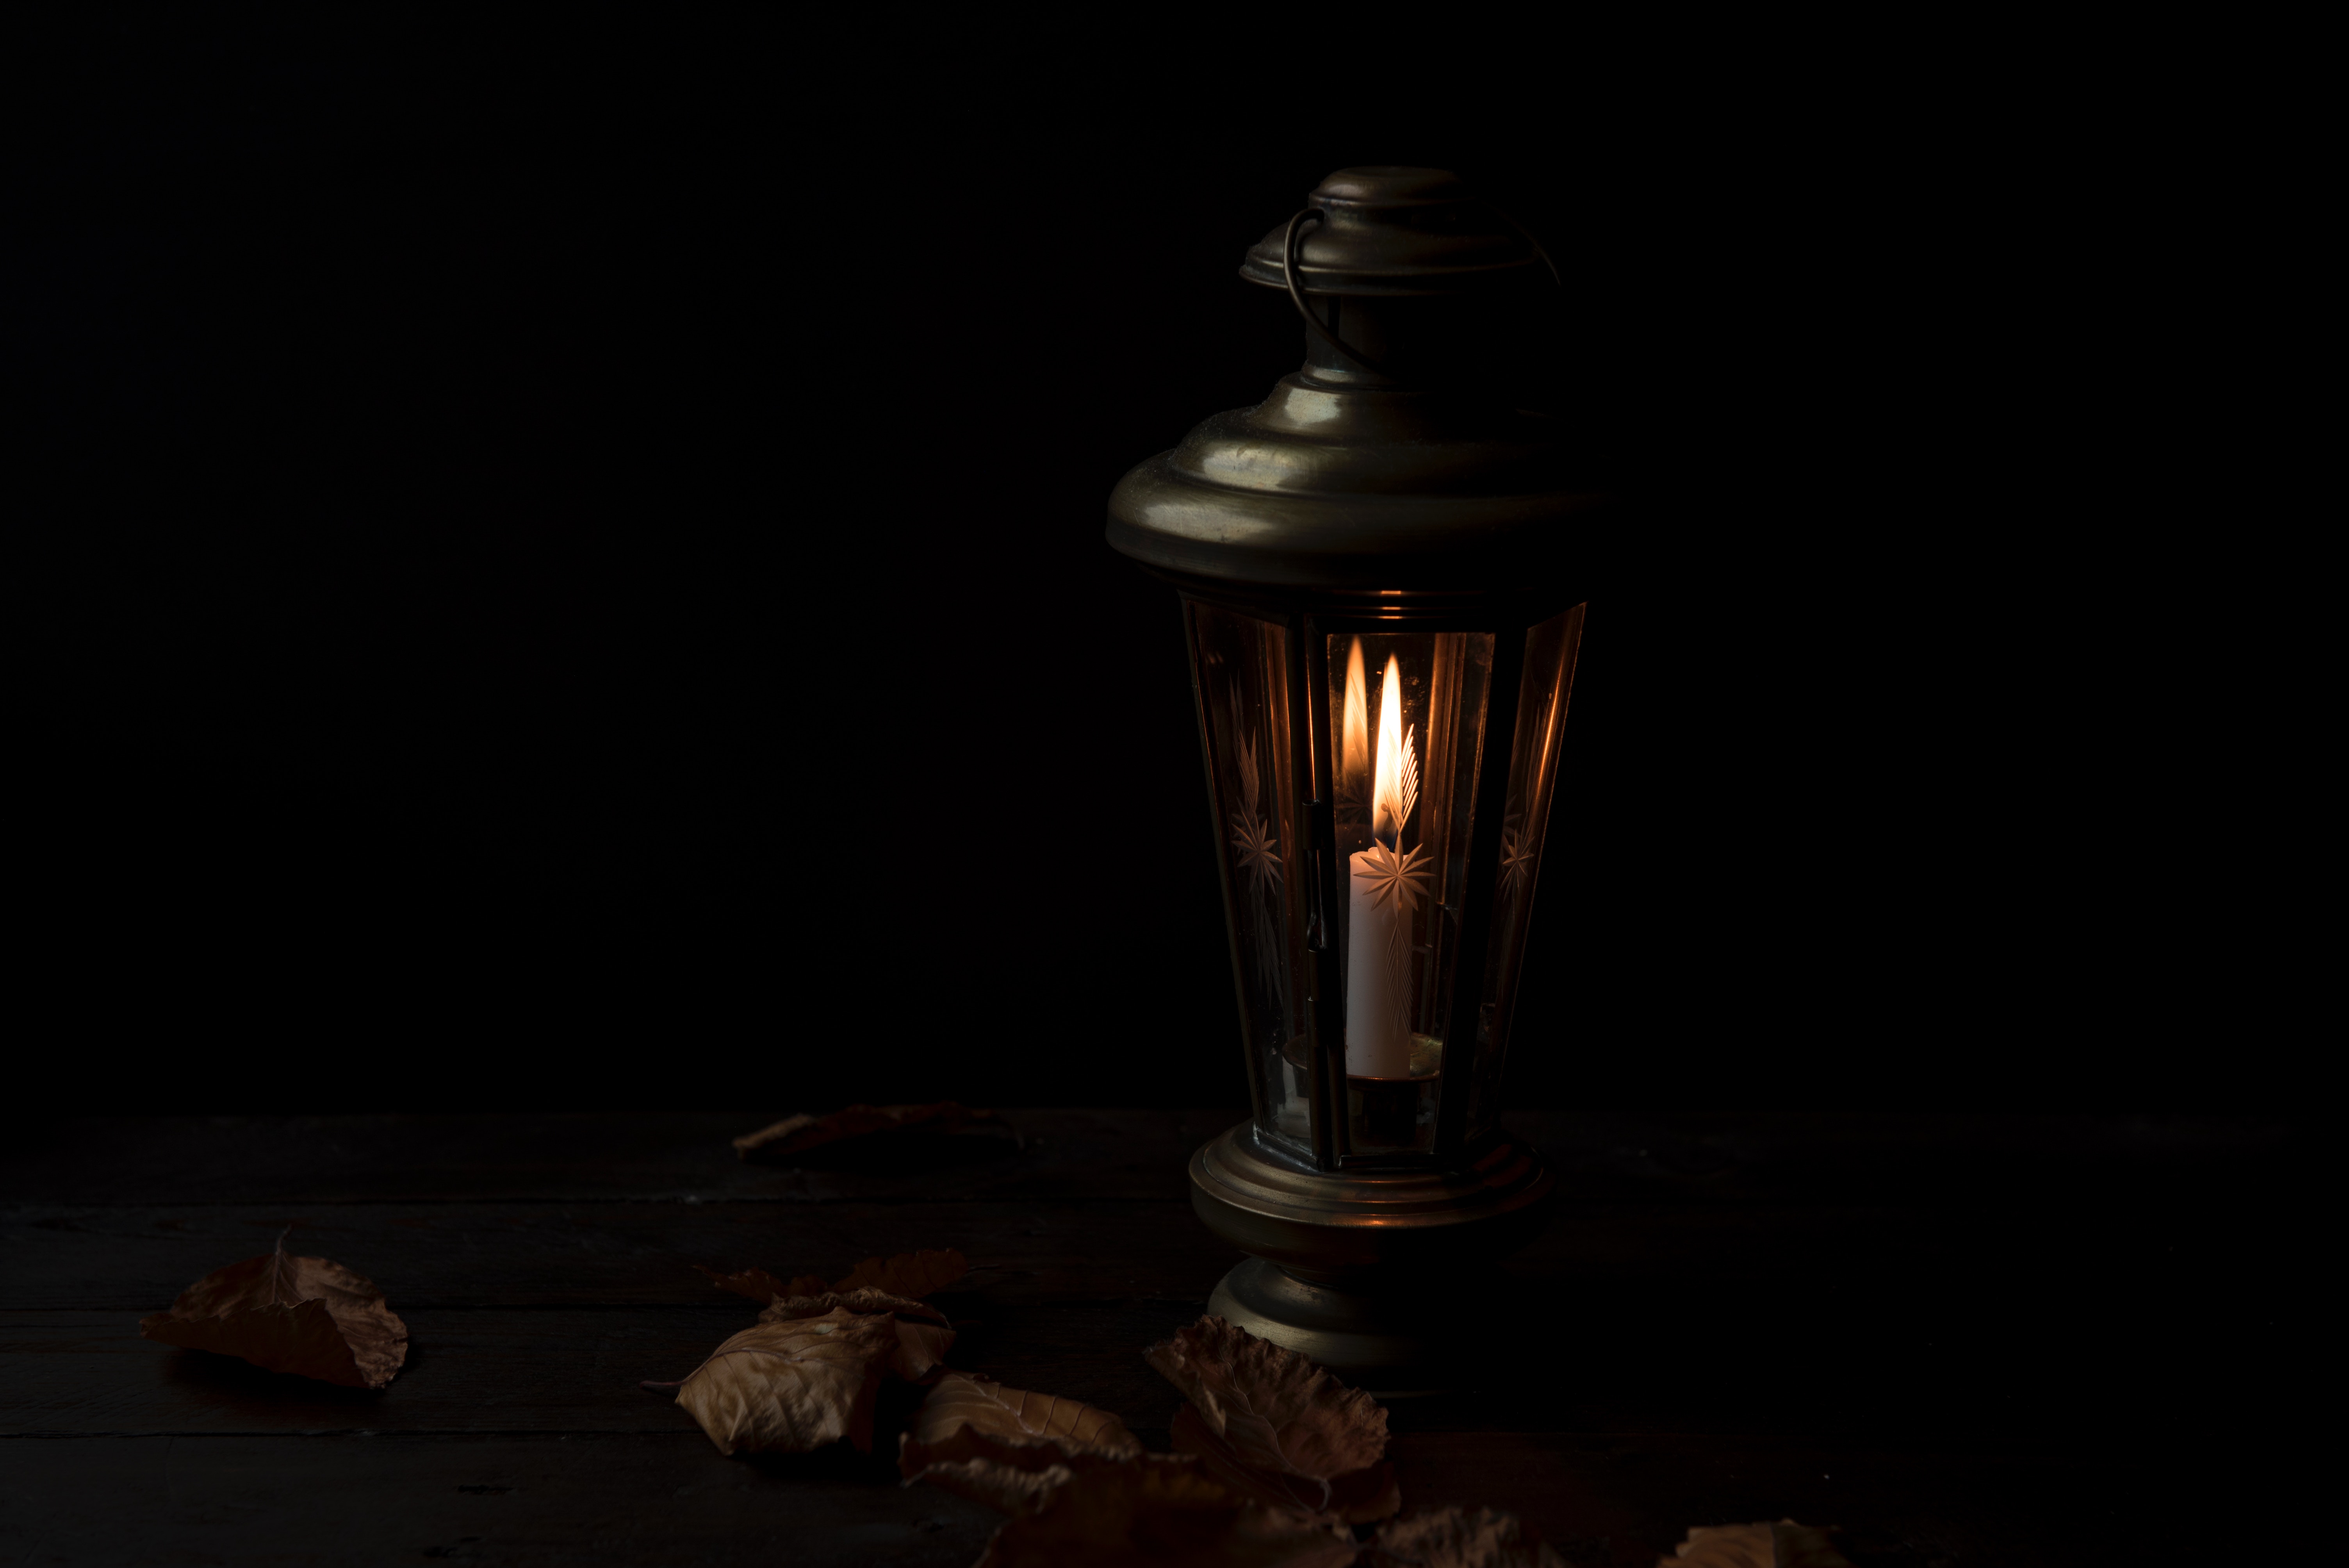 android lamp, night, candle, dark